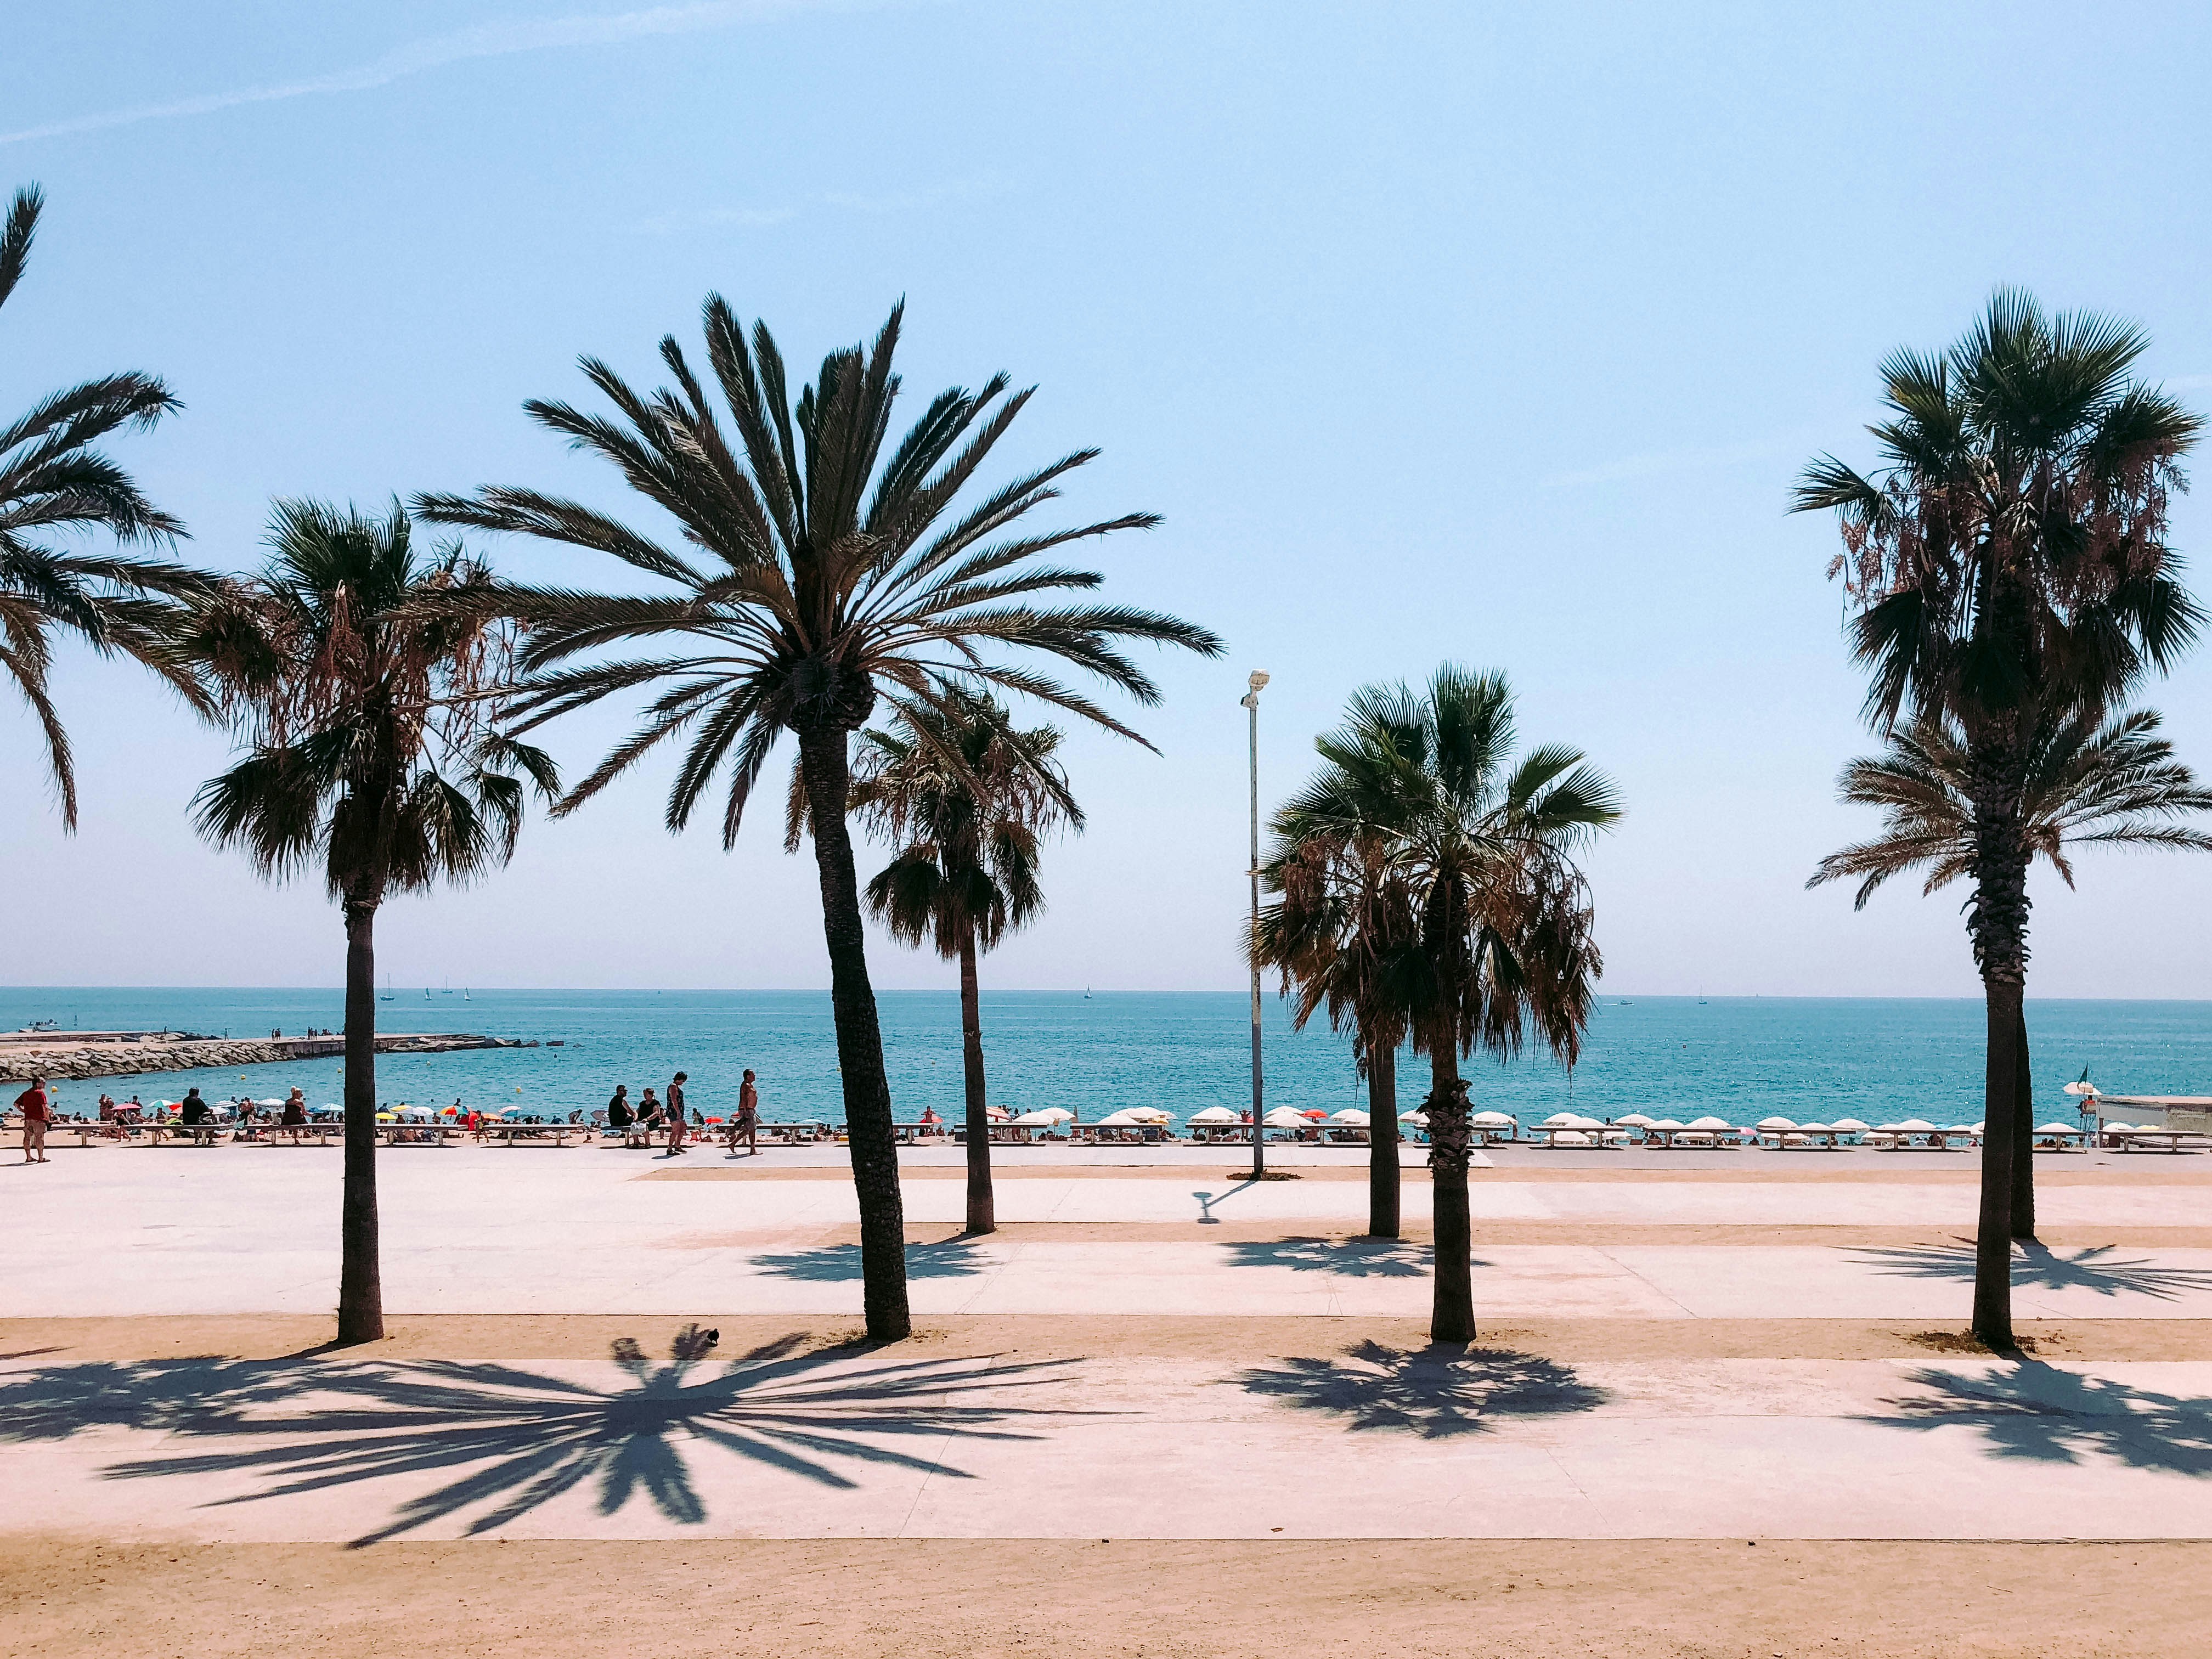 During my journey in Barcelona I went to the Barceloneta in order to see the sea and think. It’s hard to explain what I was feeling but the sea was like an old friend: you can travel, you can change as you want but he will be there whenever you need to make you feel loved.